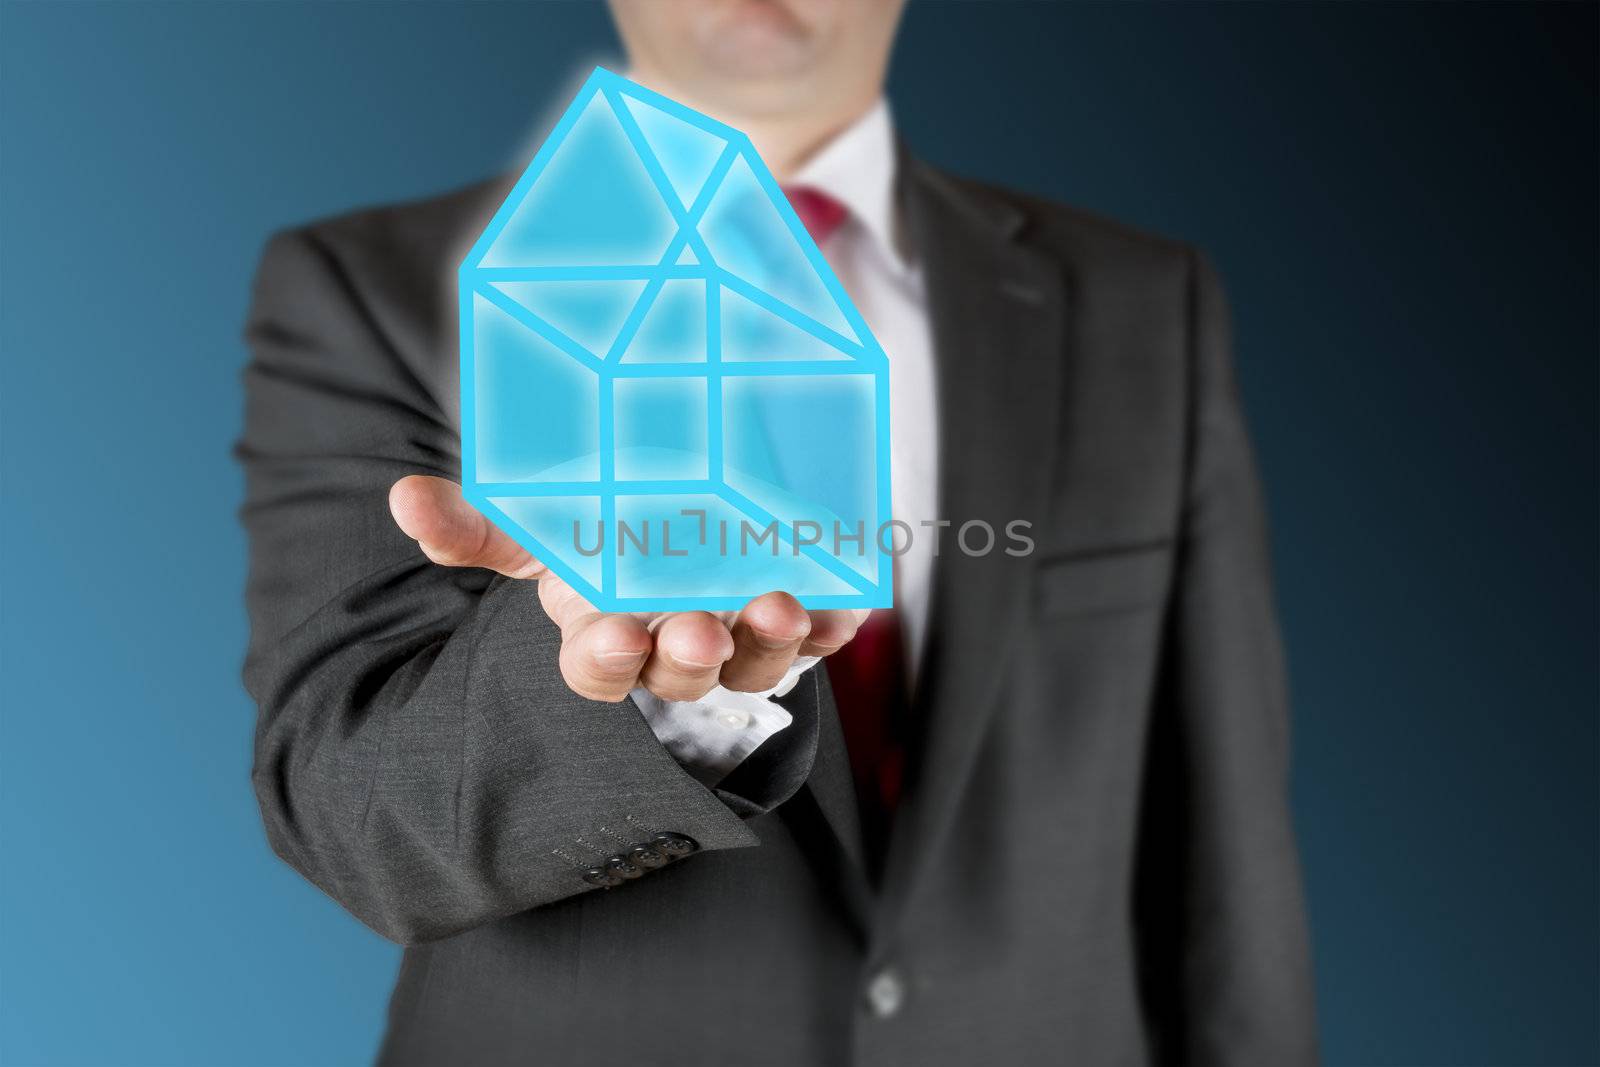 Well dressed business man is showing a illustrated blue house on his outstretched arm. Background is blue/black.